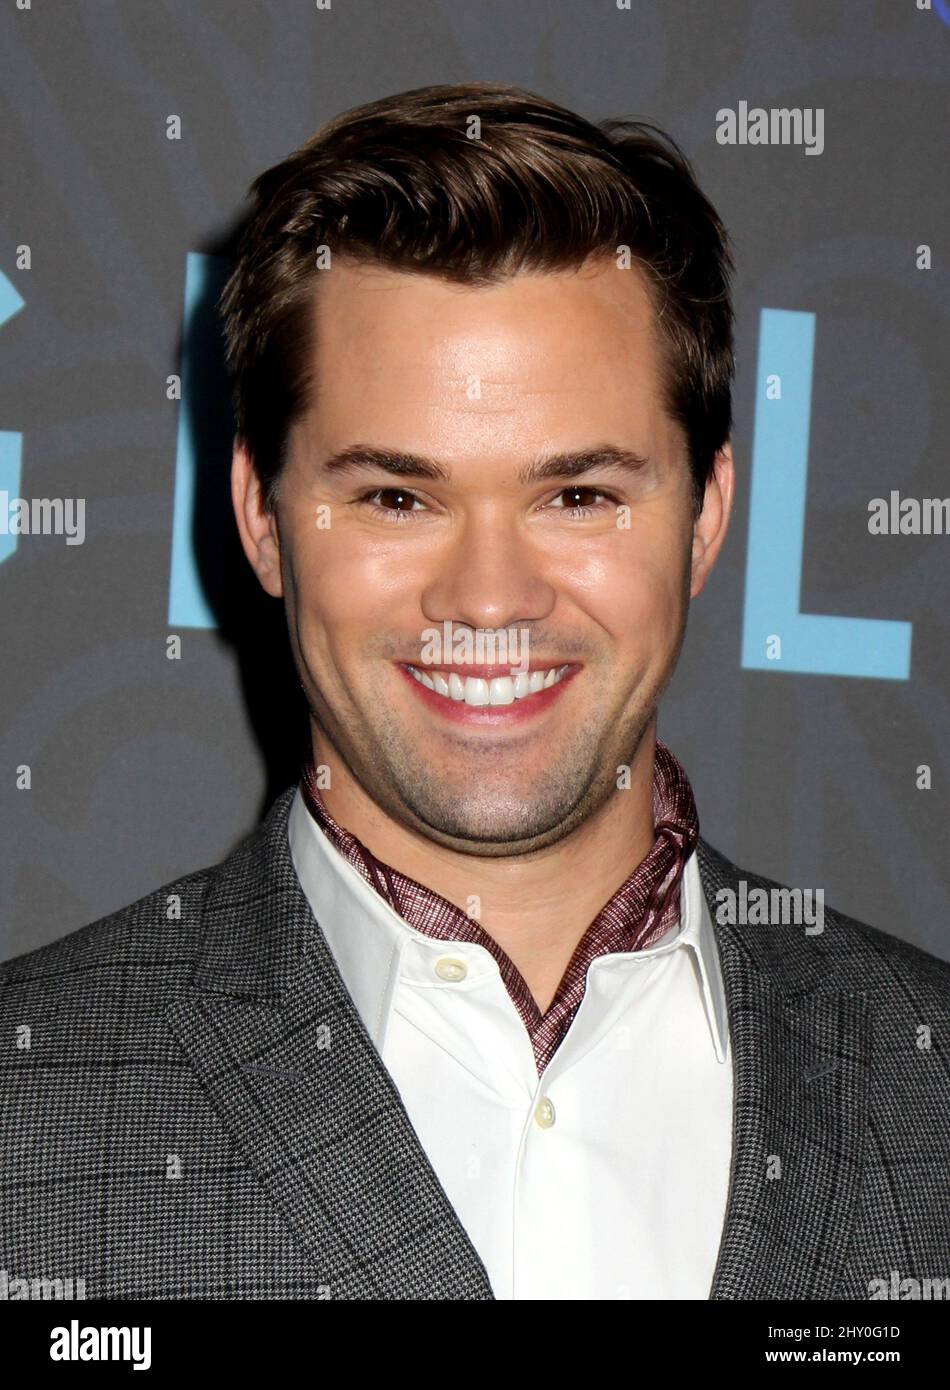 Andrew Rannells attending the premiere of season 2 of 'Girls' in NEw York. Stock Photo